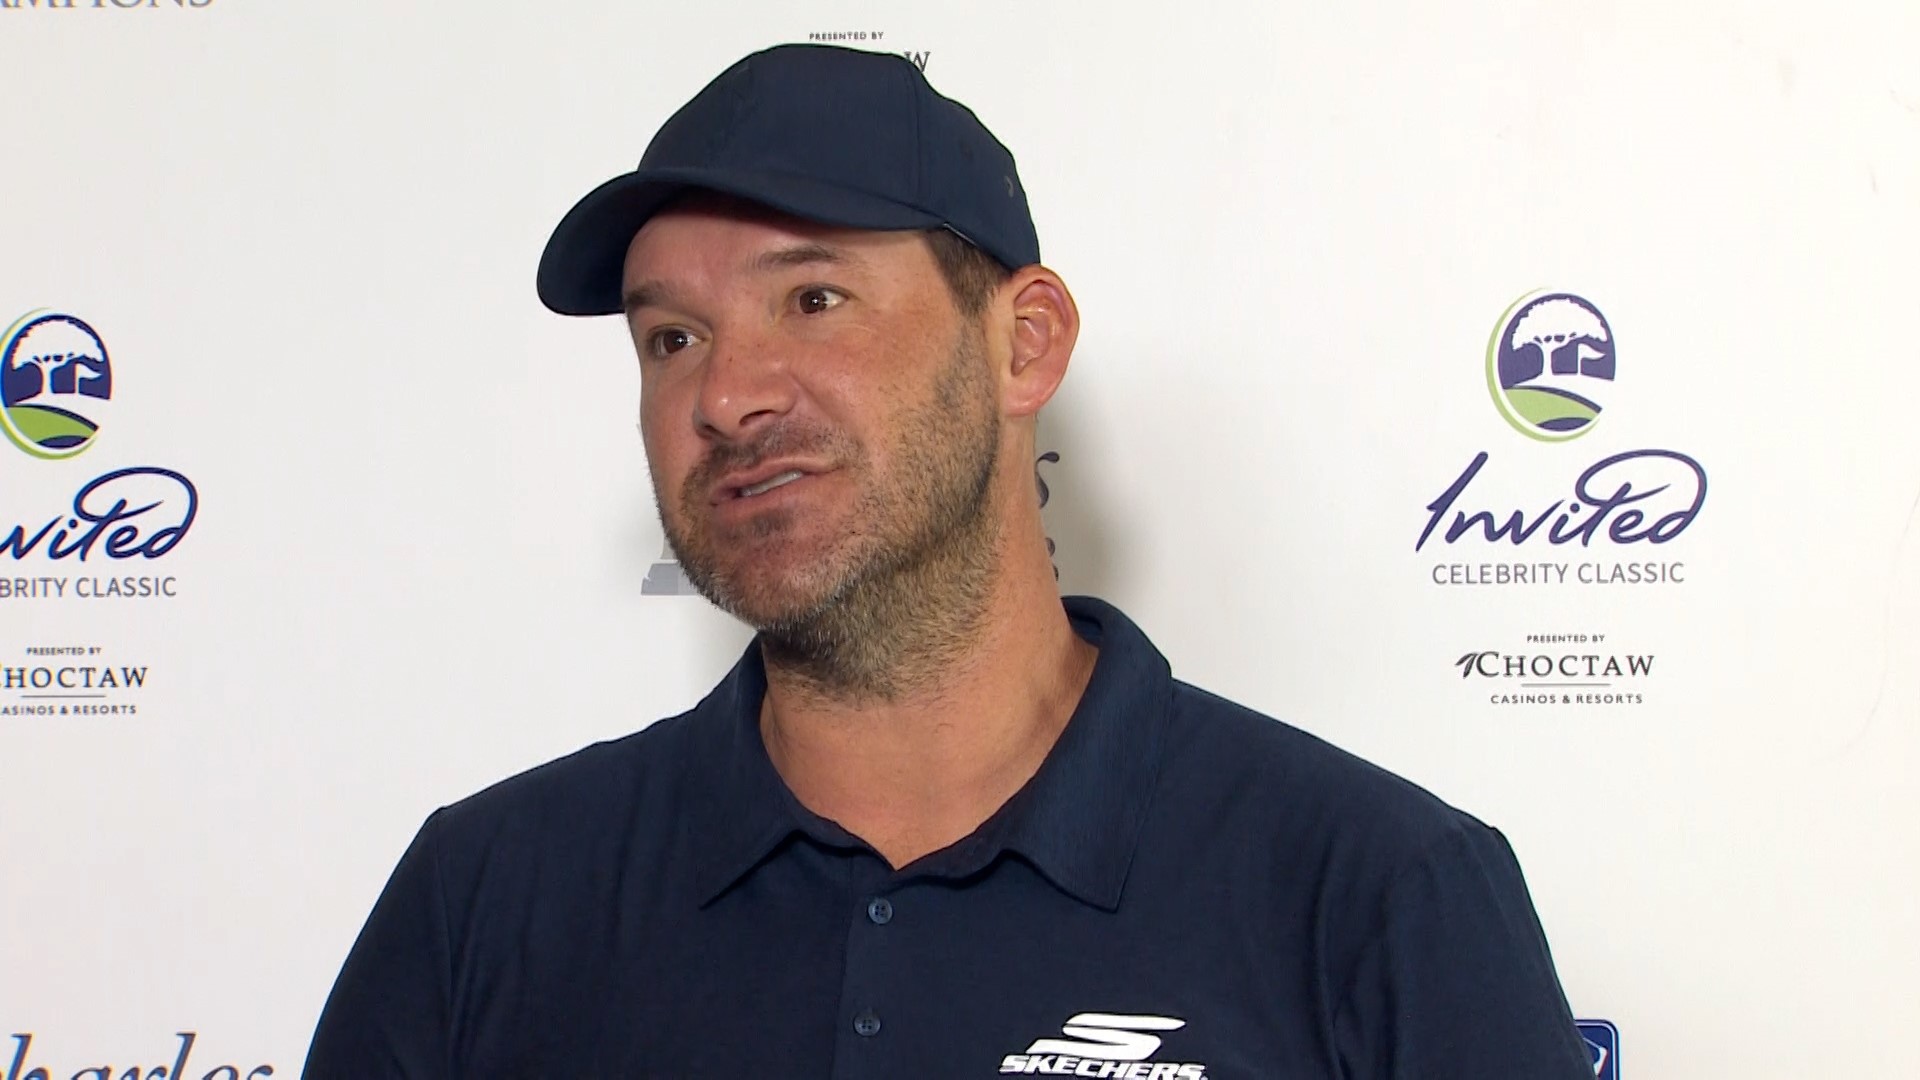 Former Dallas Cowboys quarterback Tony Romo, and current CBS NFL analyst, talked about his passion for golf ahead of the Invited Celebrity Classic.